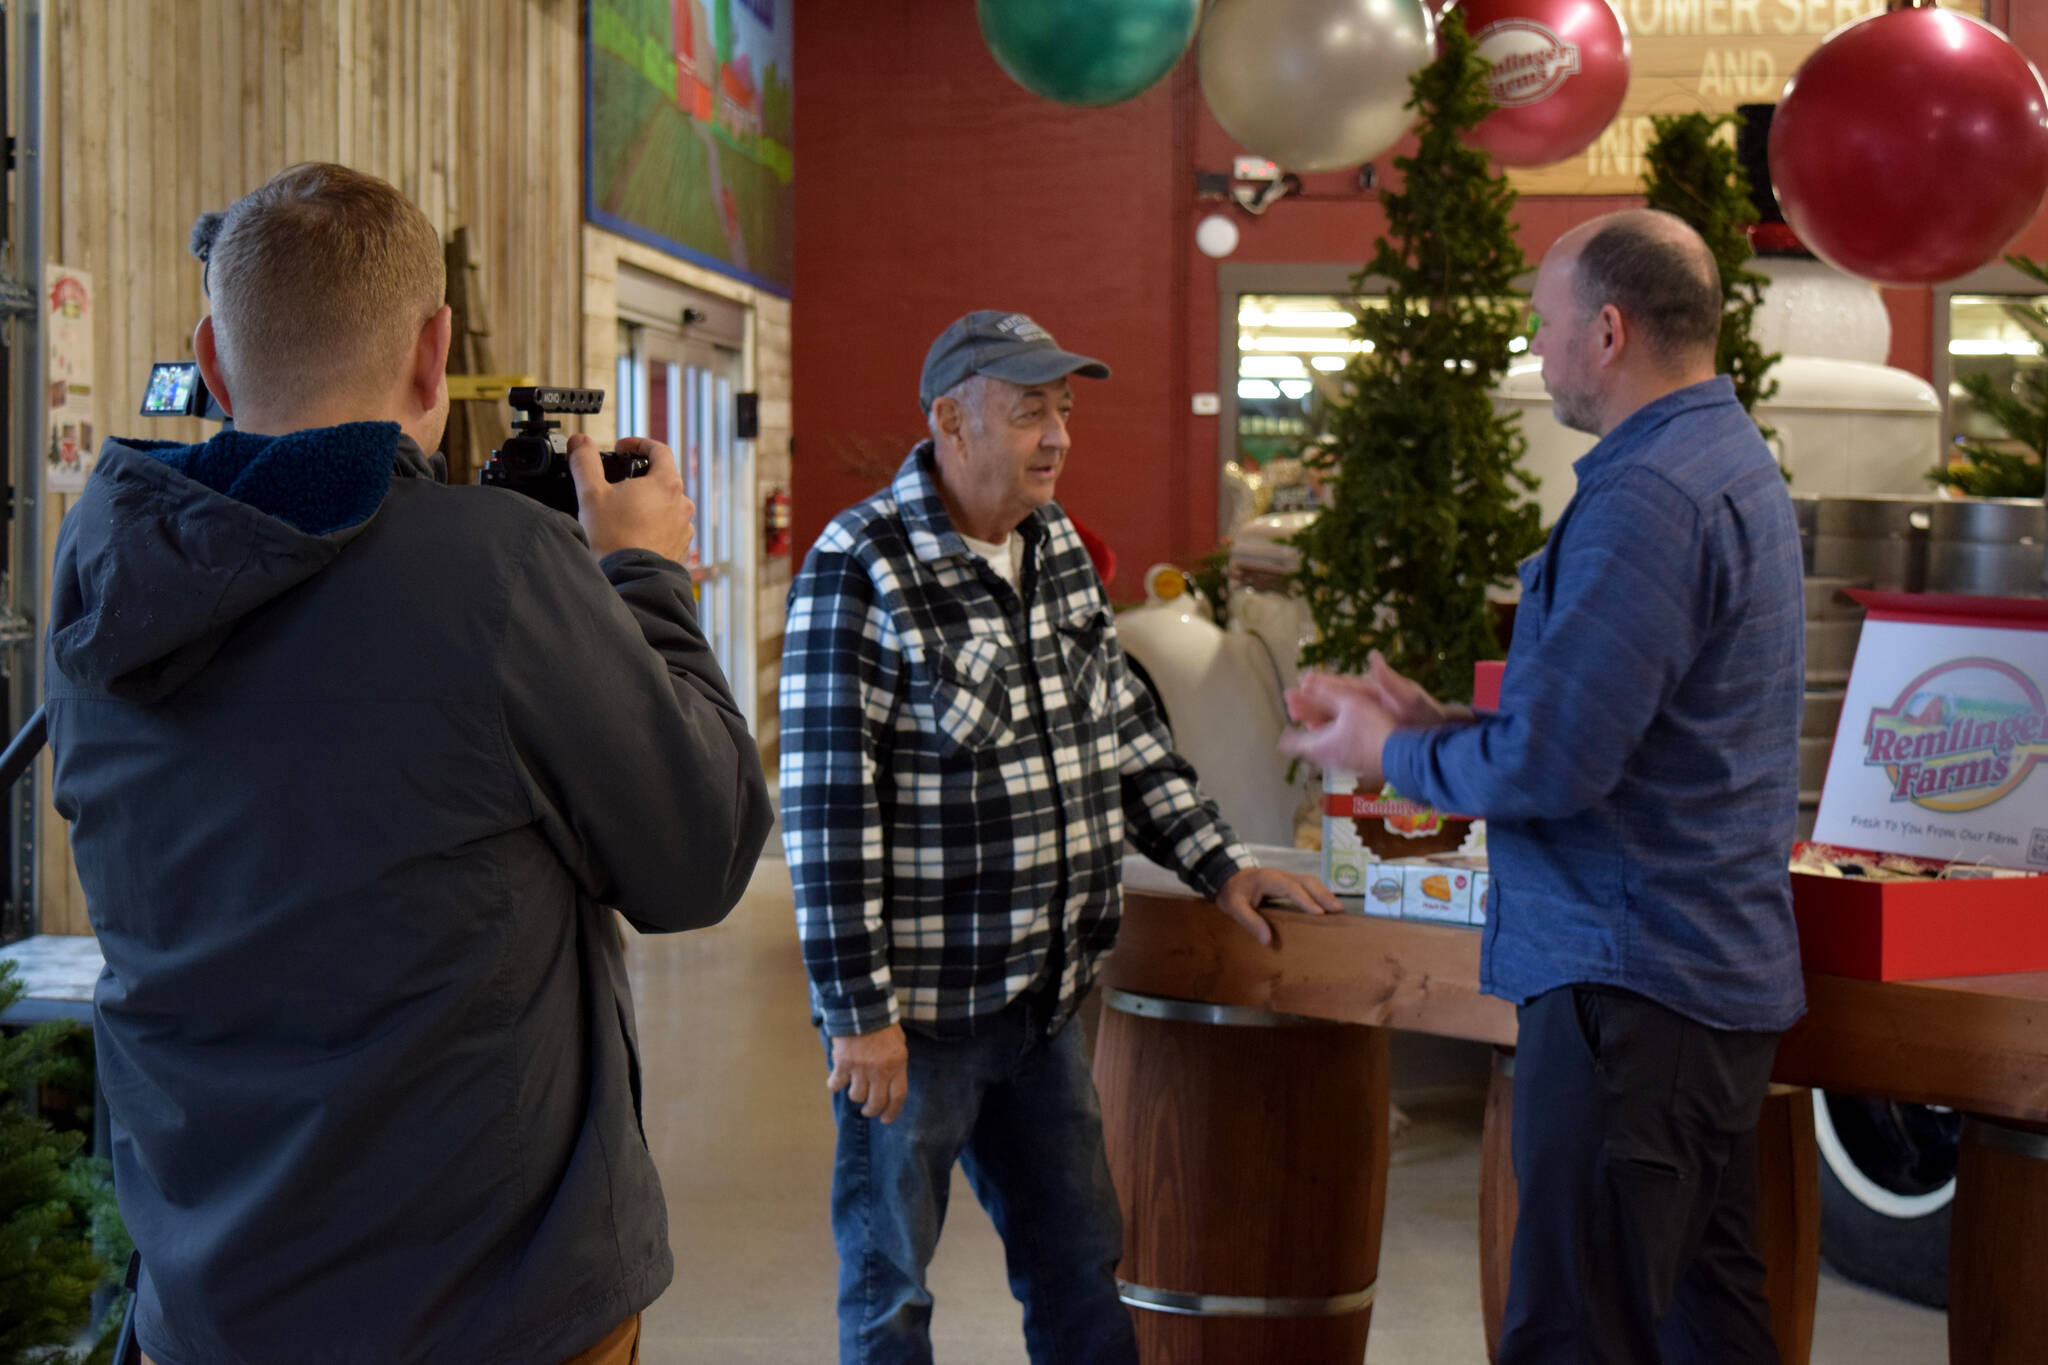 Brian Davis chats with Gary Remlinger, of Remlinger Farms in Carnation.